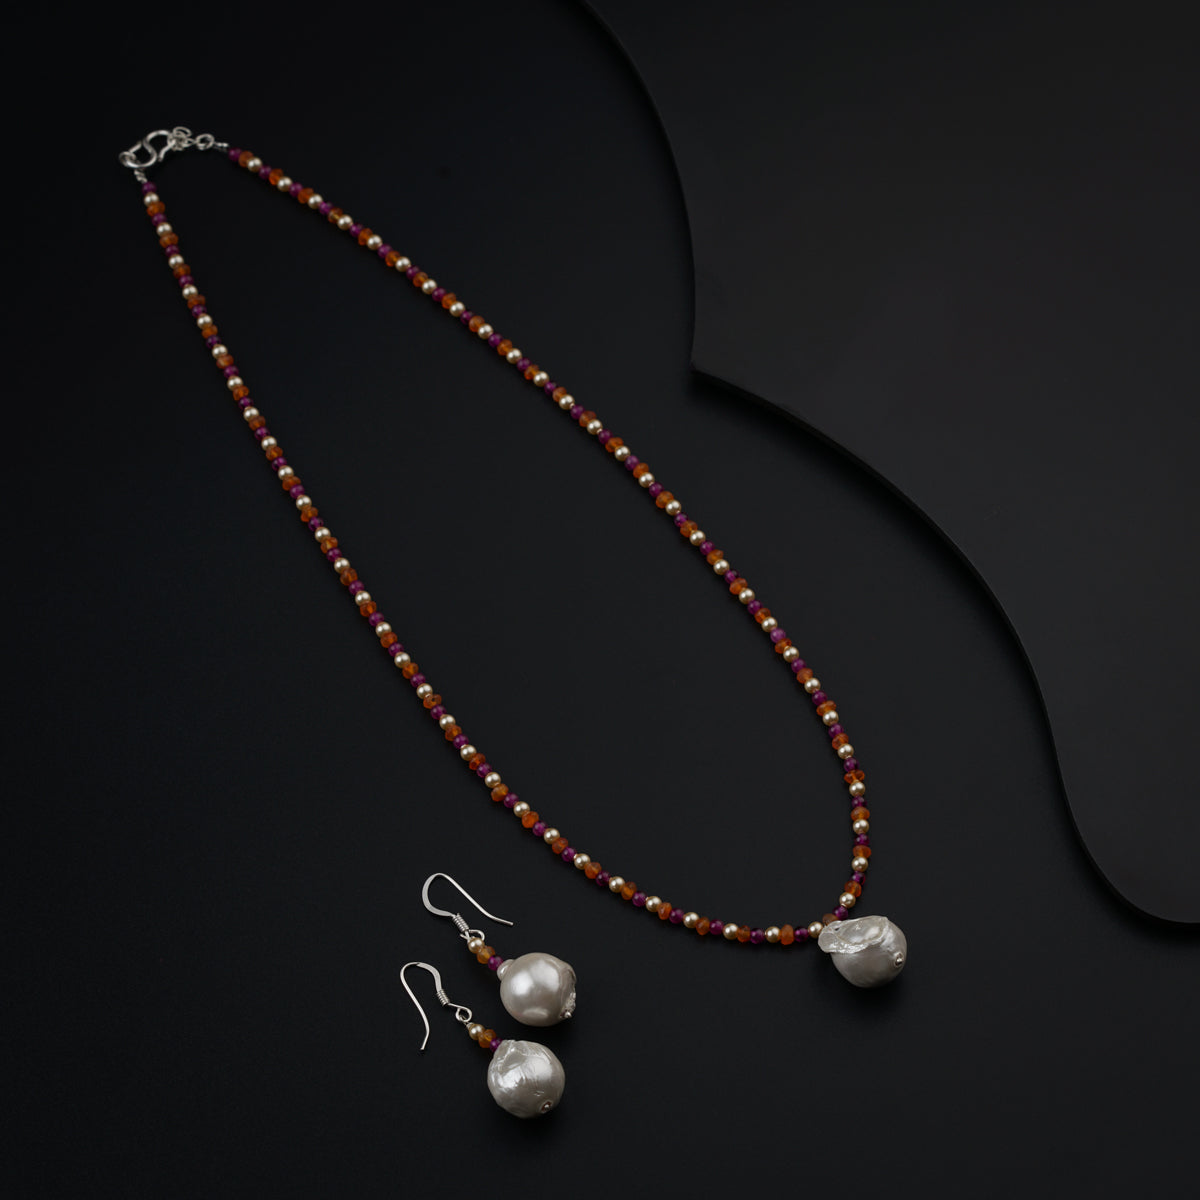 Zen Vibes Set: High Quality Pearls, Rubies and Carnelians